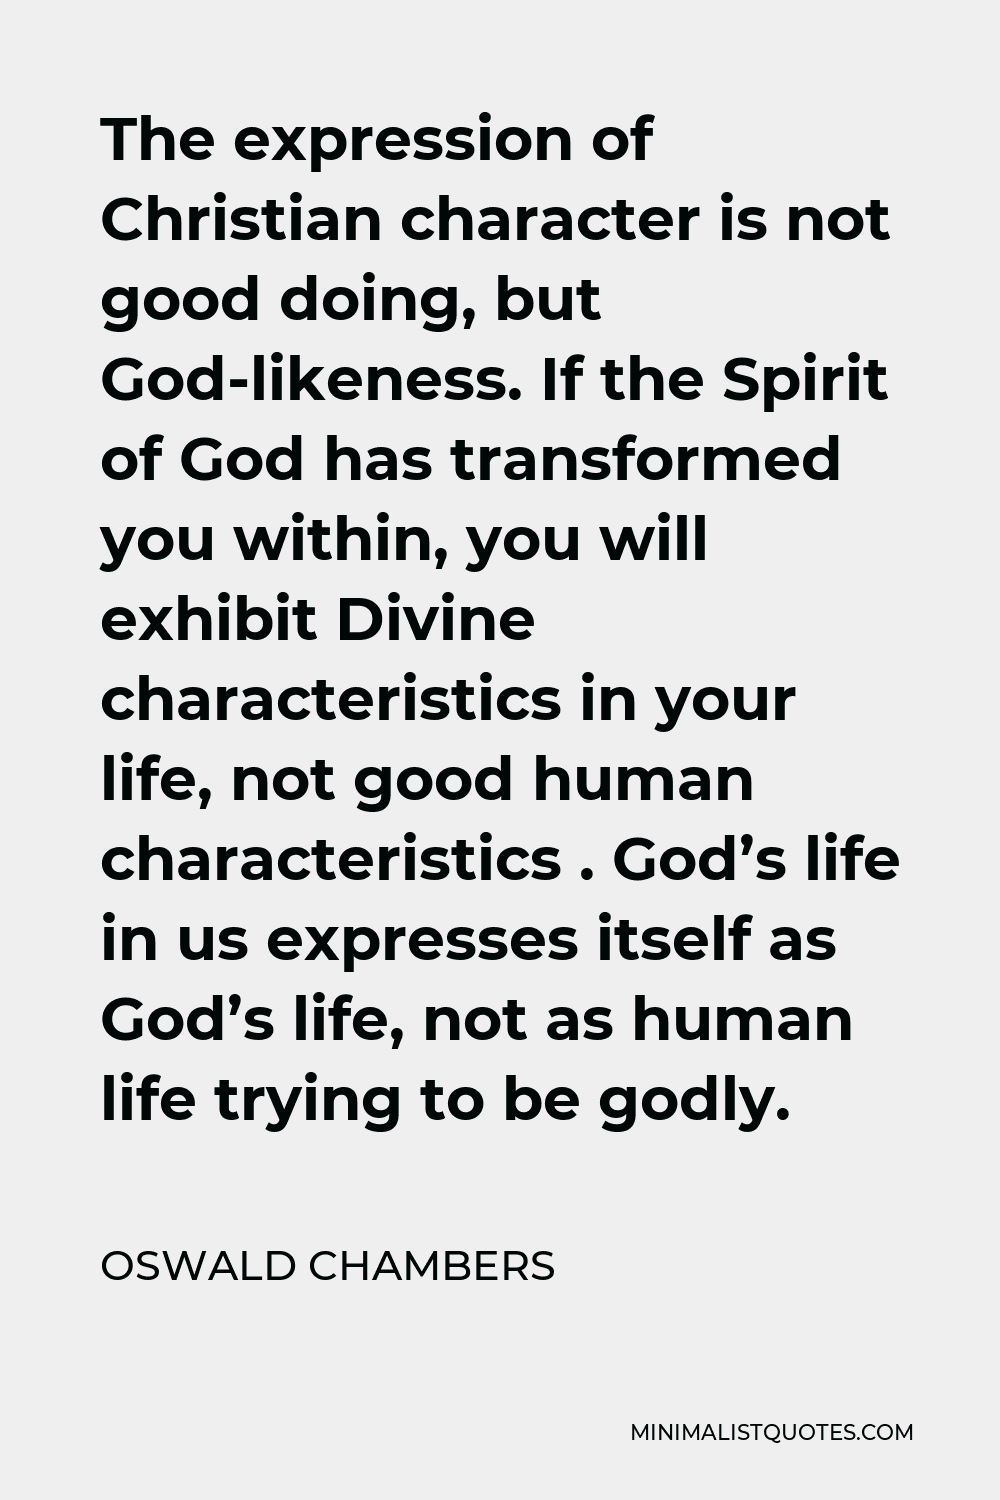 Oswald Chambers Quote - The expression of Christian character is not good doing, but God-likeness. If the Spirit of God has transformed you within, you will exhibit Divine characteristics in your life, not good human characteristics . God’s life in us expresses itself as God’s life, not as human life trying to be godly.